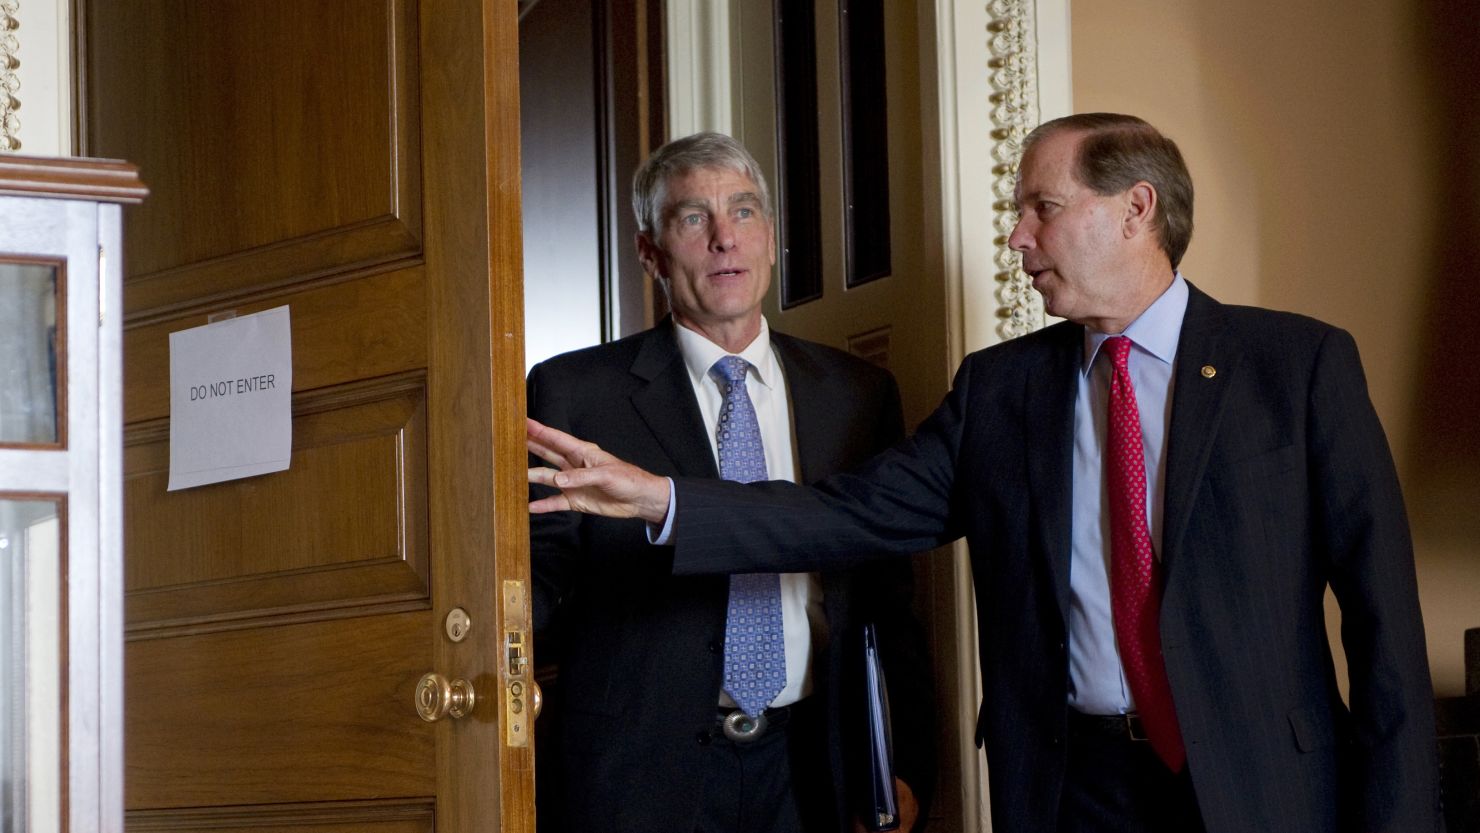 Sen. Mark Udall, D-Colo., and his cousin Sen. Tom Udall, D-N.M., attend a weekly Senate policy luncheon in Washington, D.C.